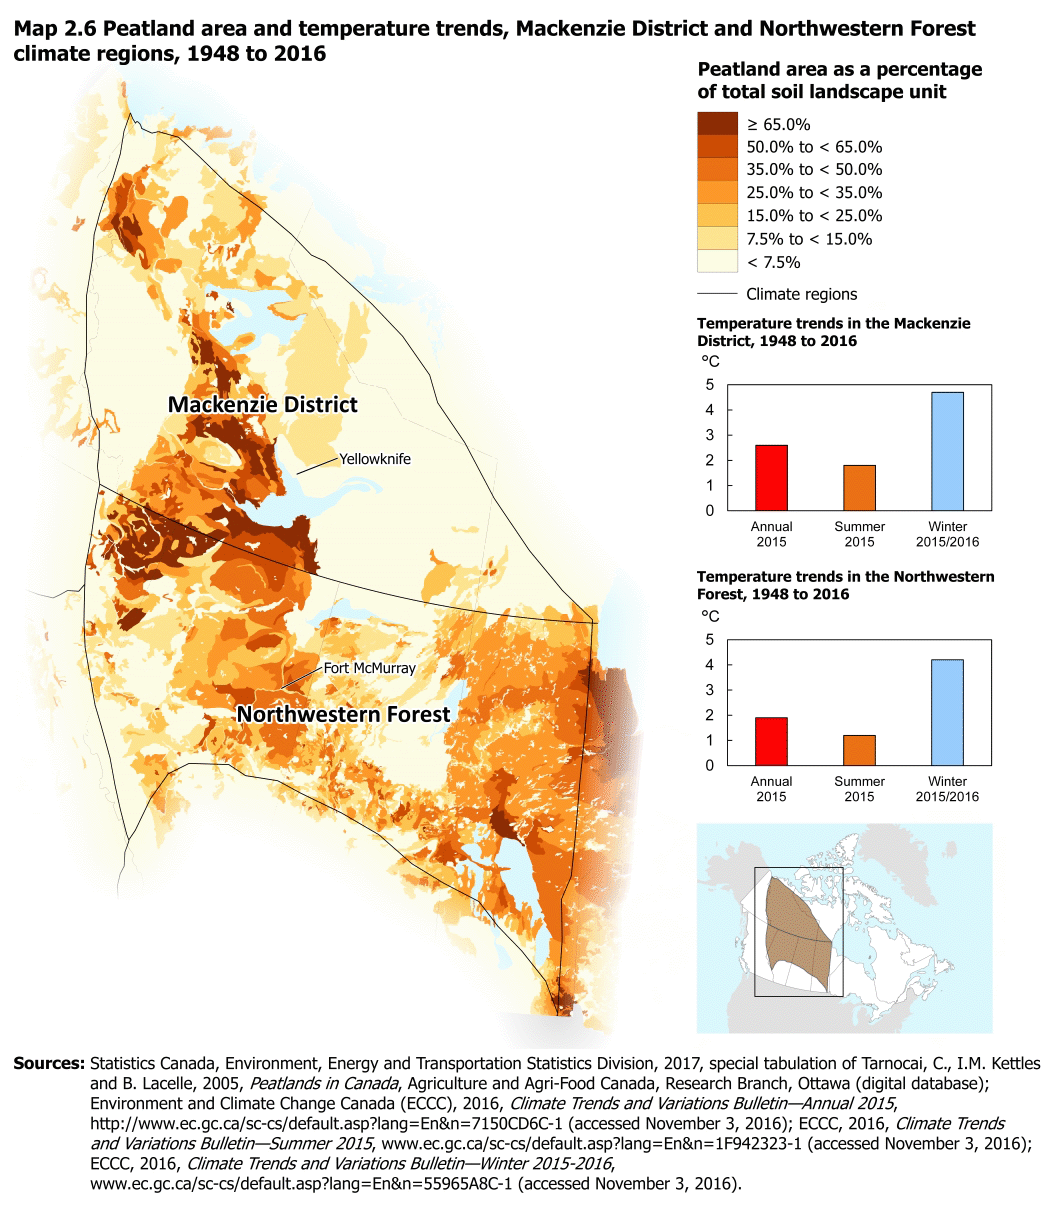 Map 2.6 Peatland area and temperature trends, Mackenzie District and Northwestern Forest climate regions, 1948 to 2016